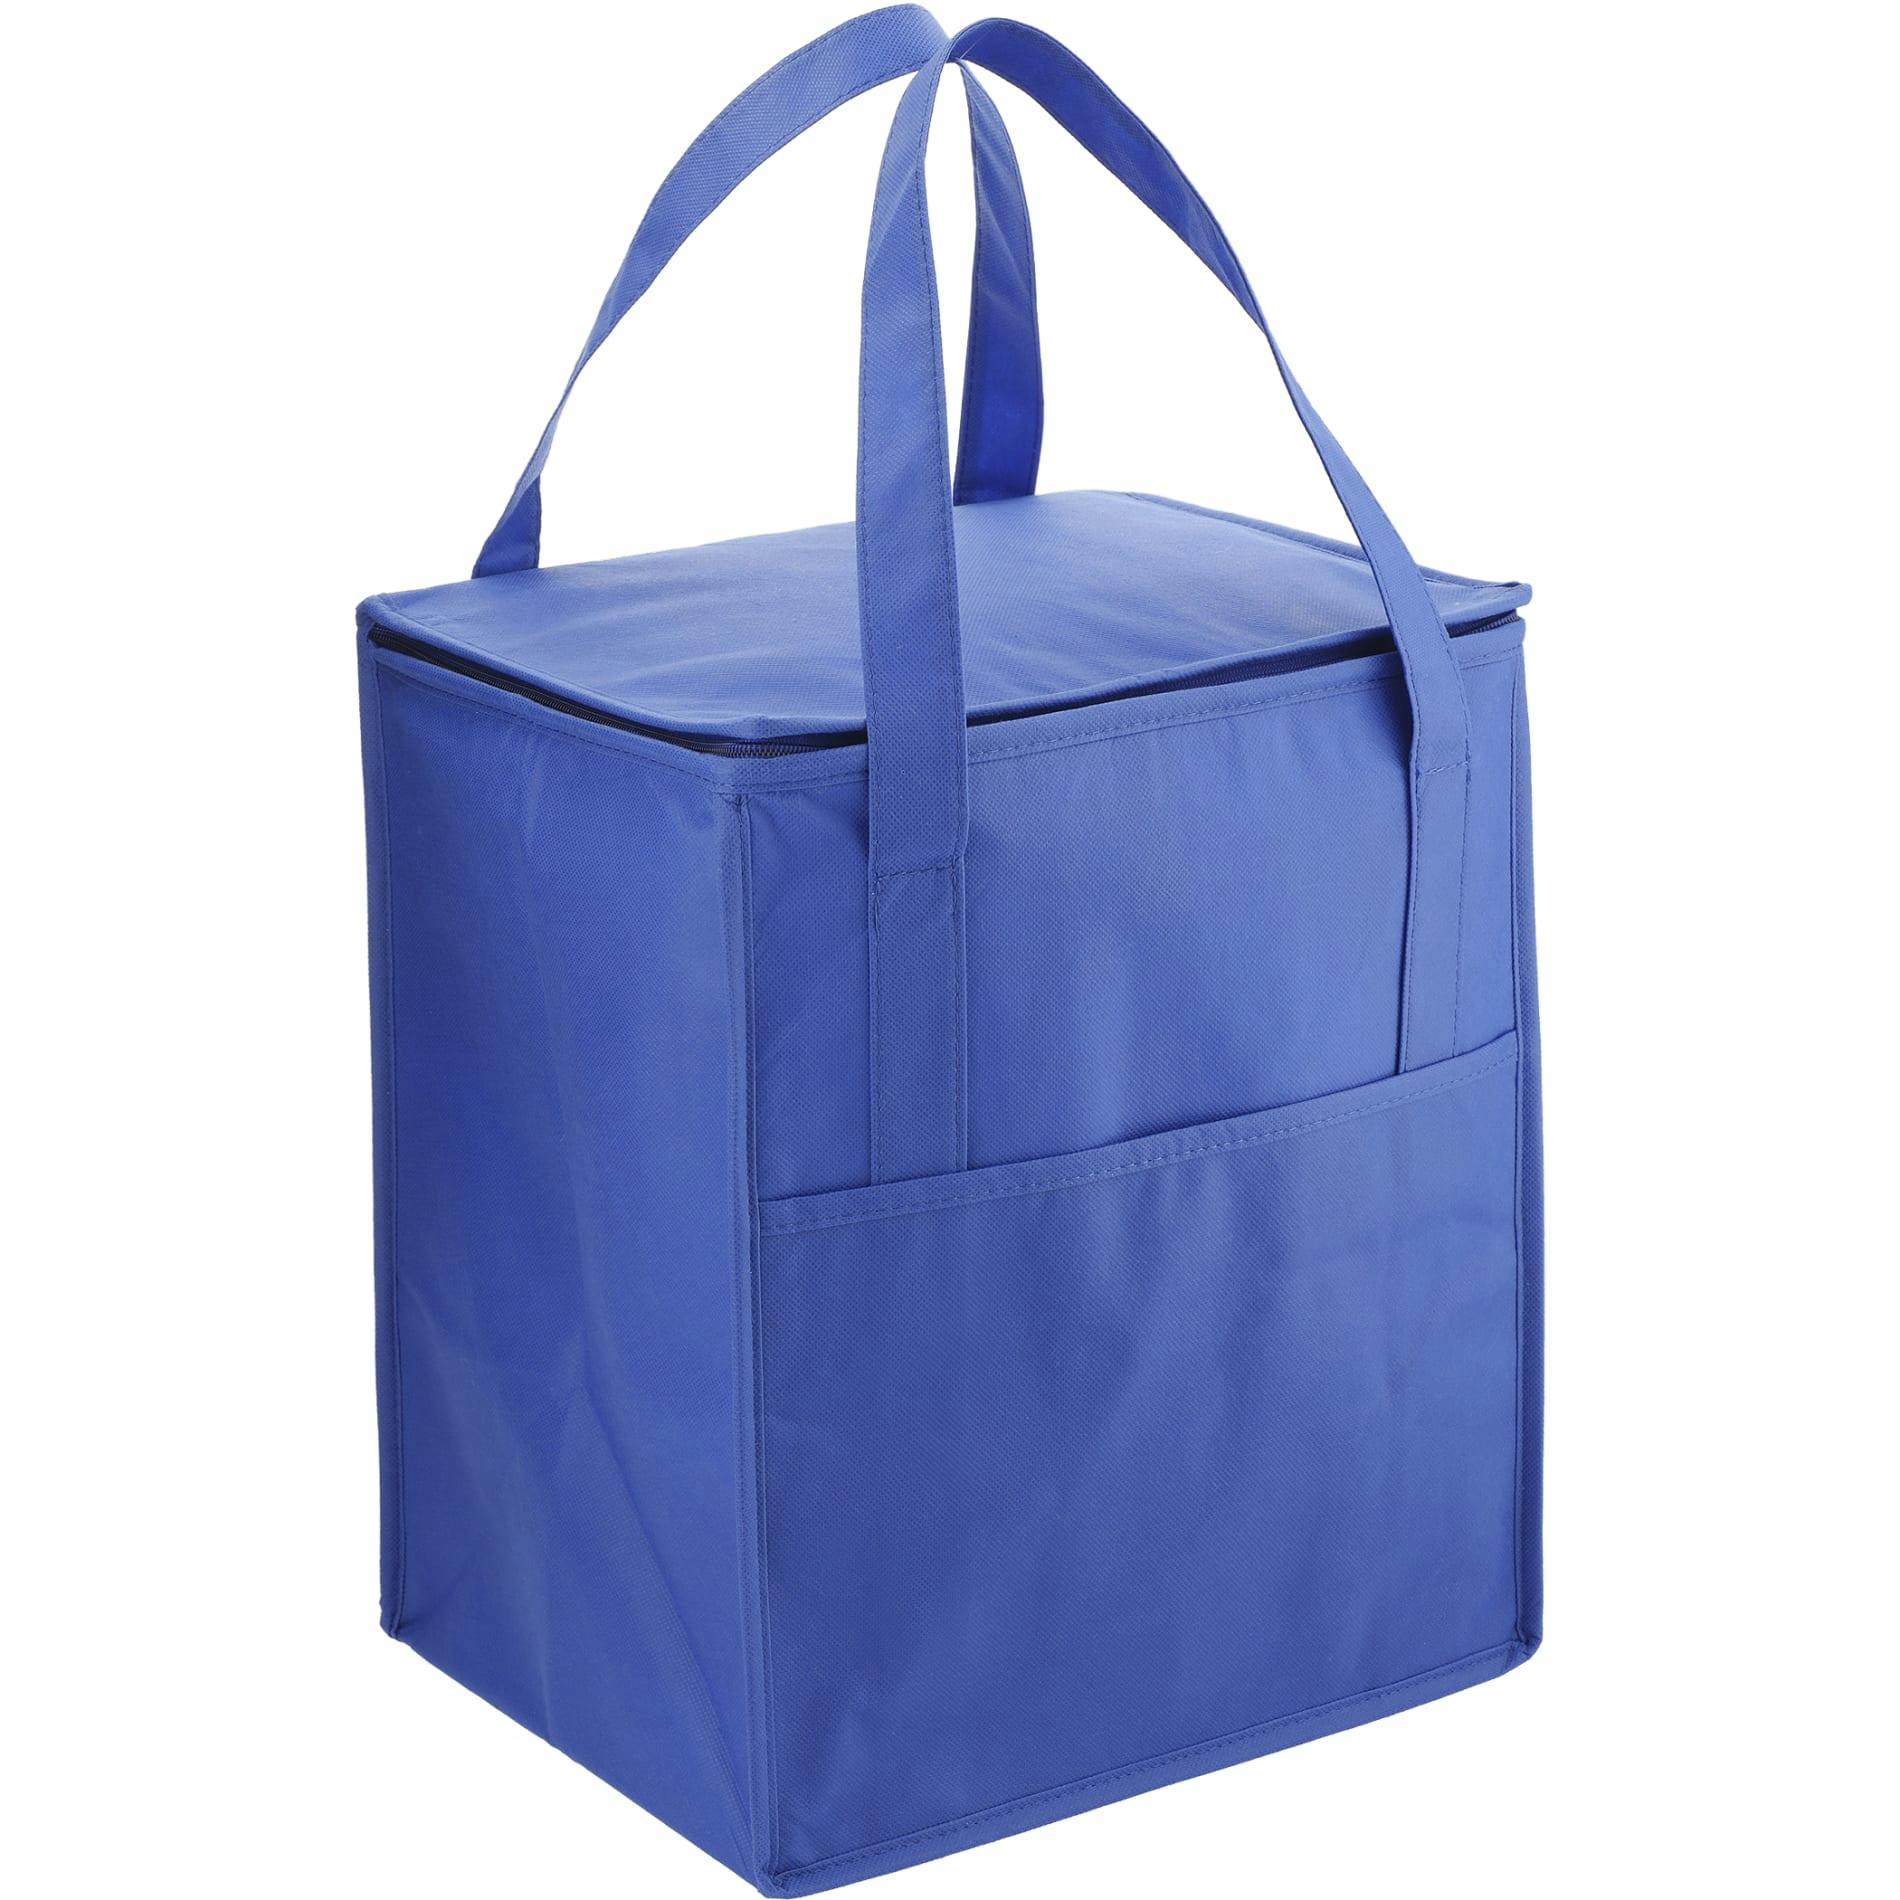 Hercules Flat Top Insulated Grocery Tote - additional Image 4